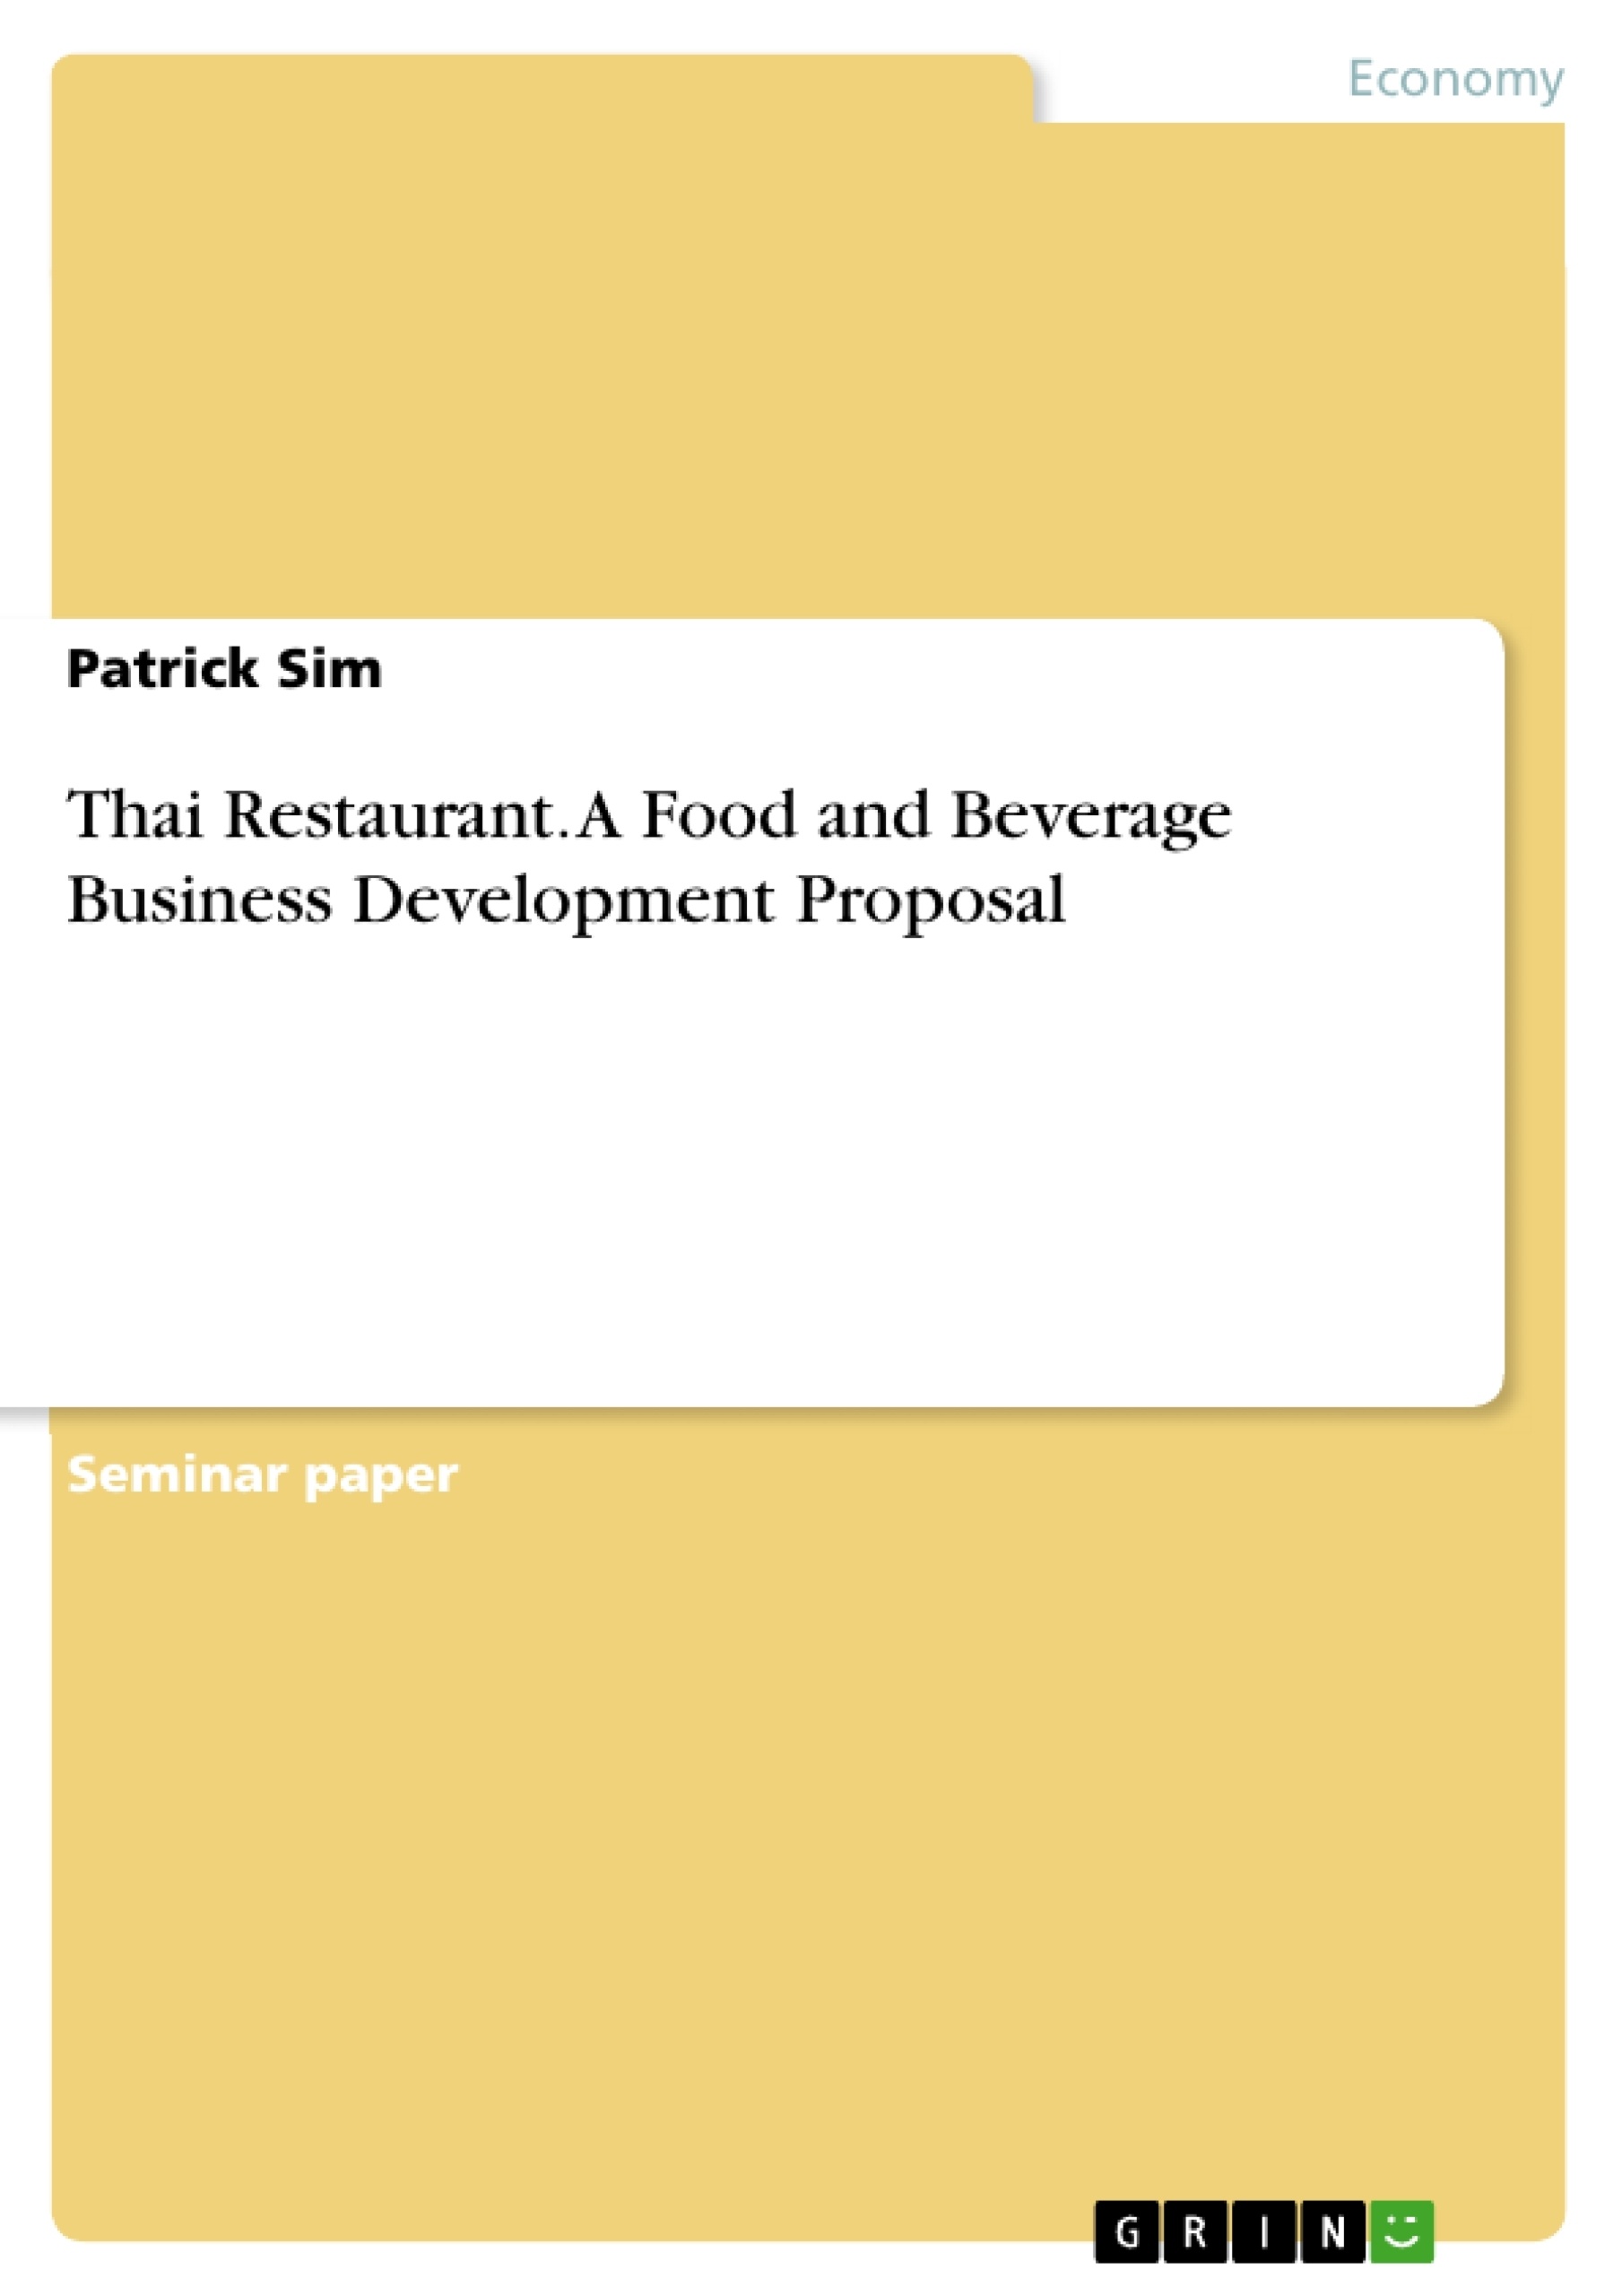 Title: Thai Restaurant. A Food and Beverage Business Development Proposal